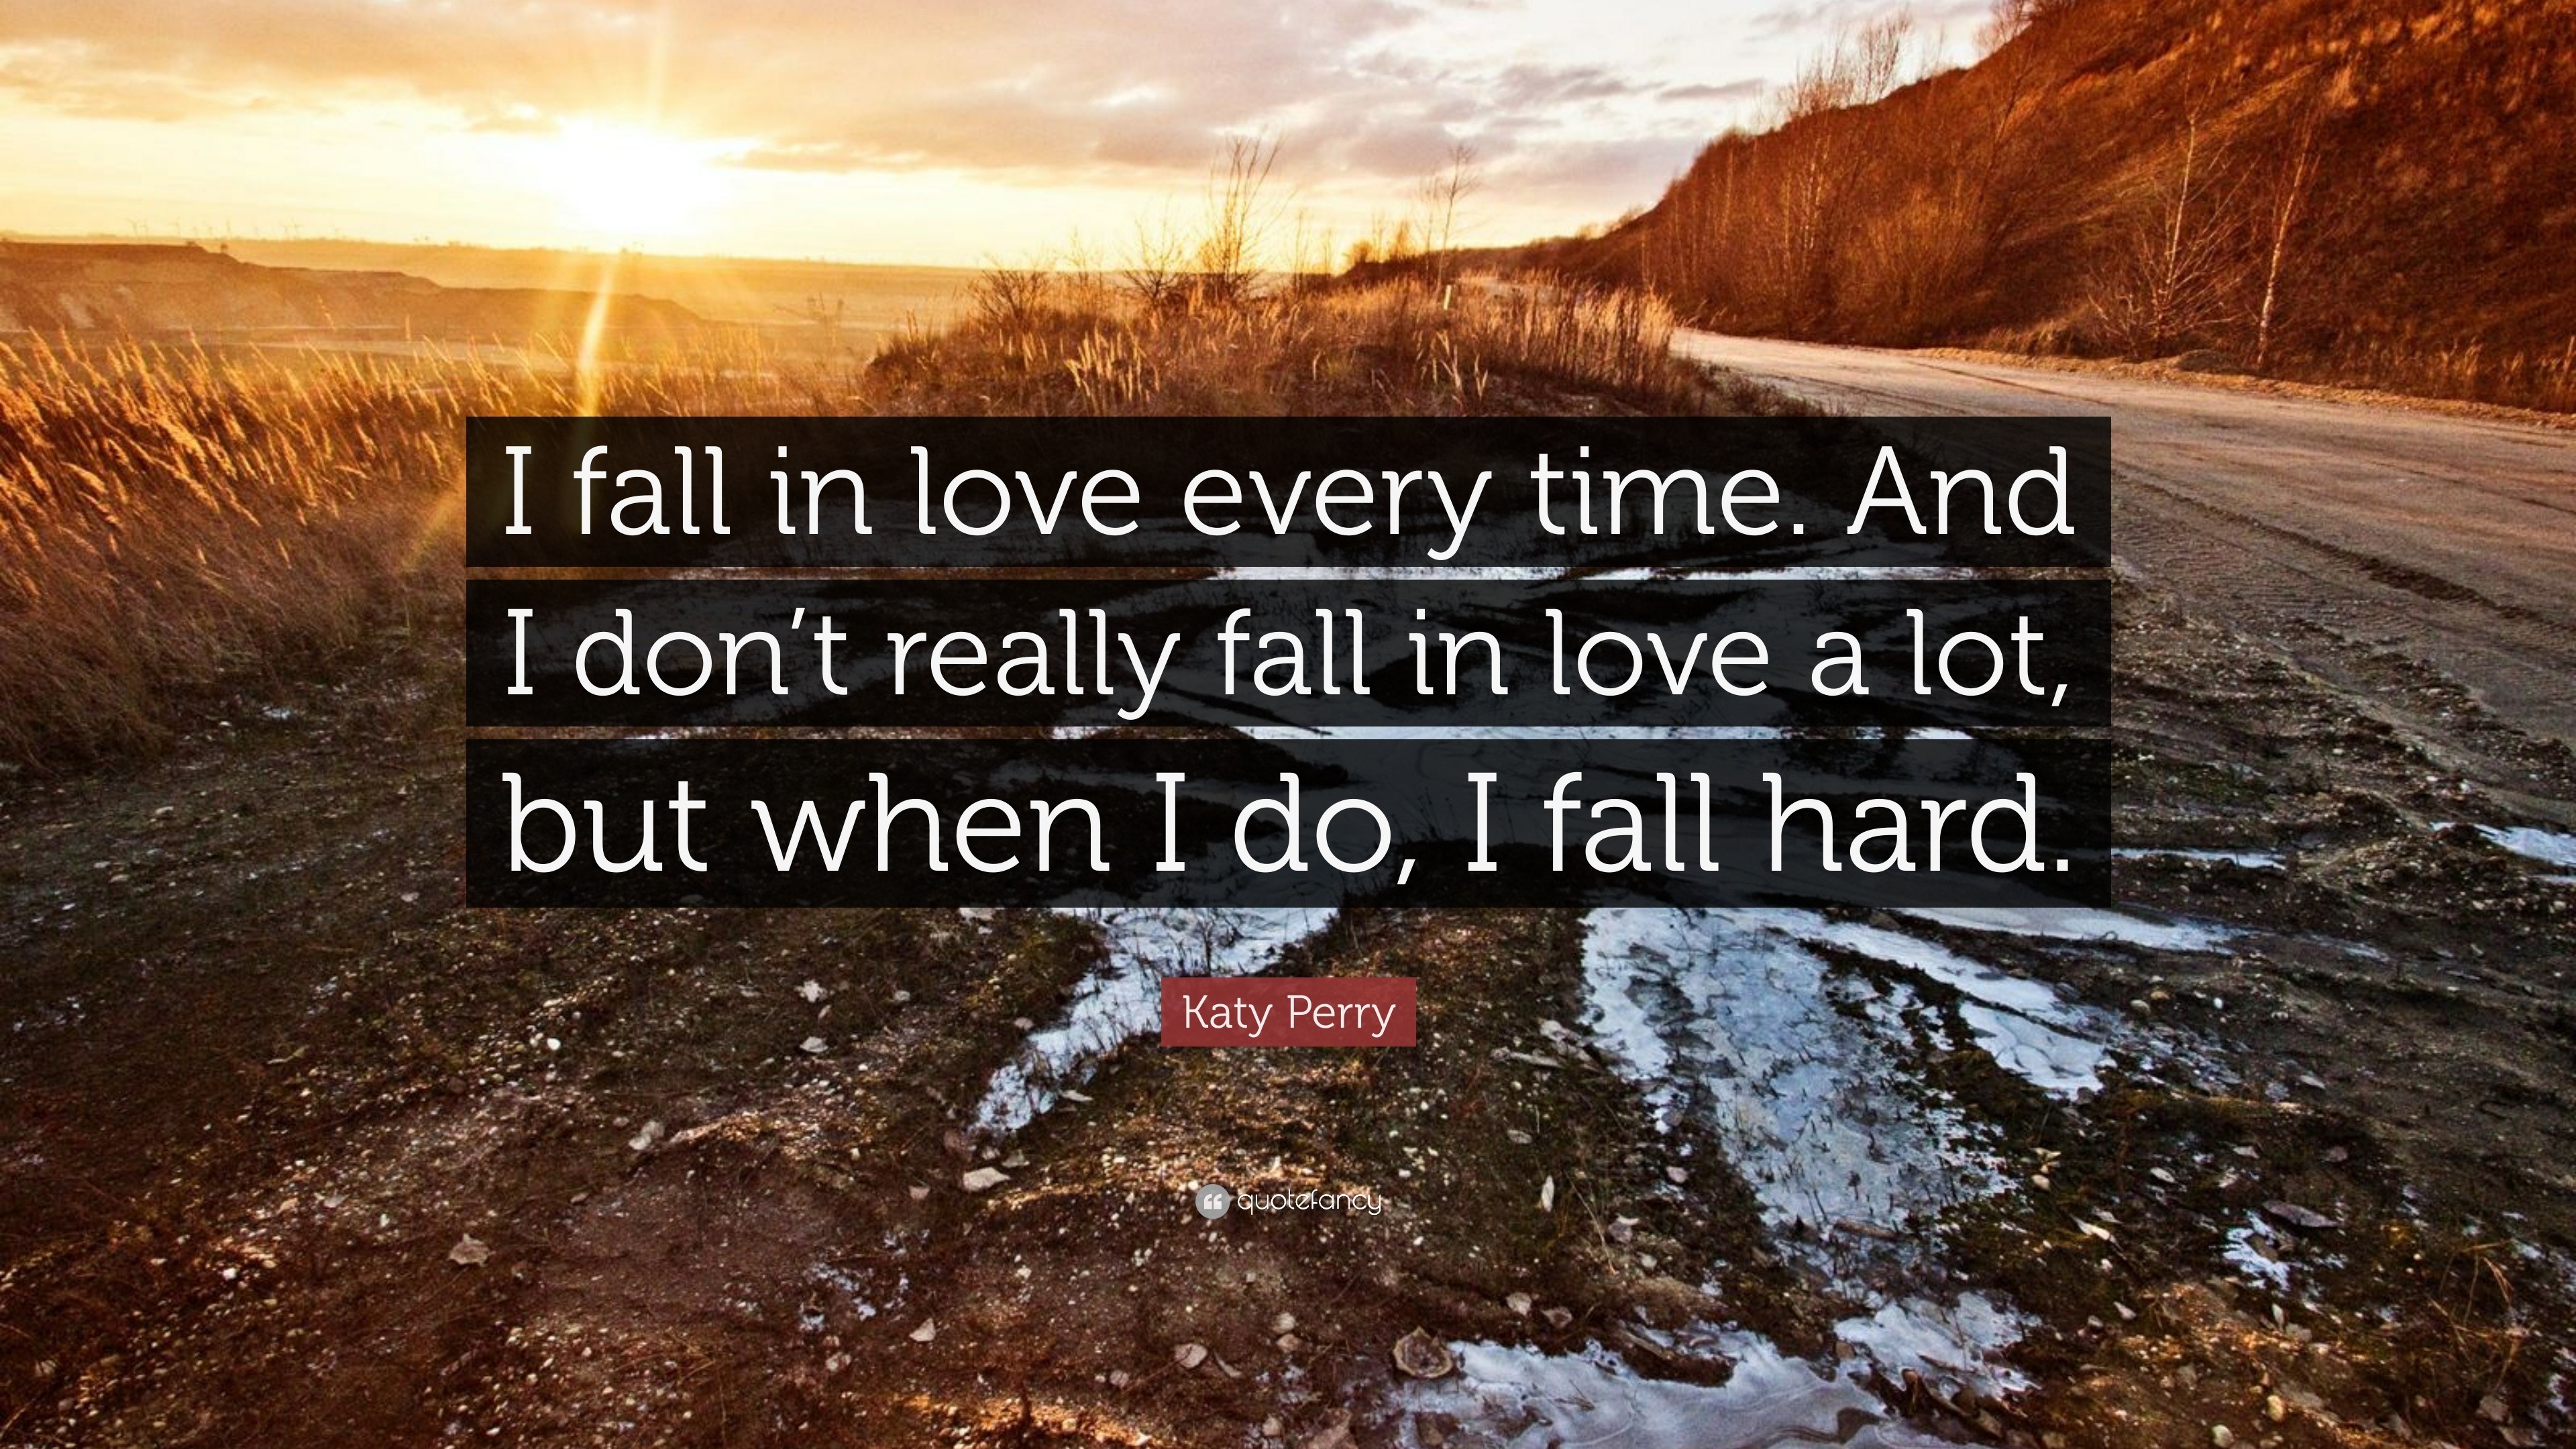 Katy Perry Quote “I fall in love every time And I don